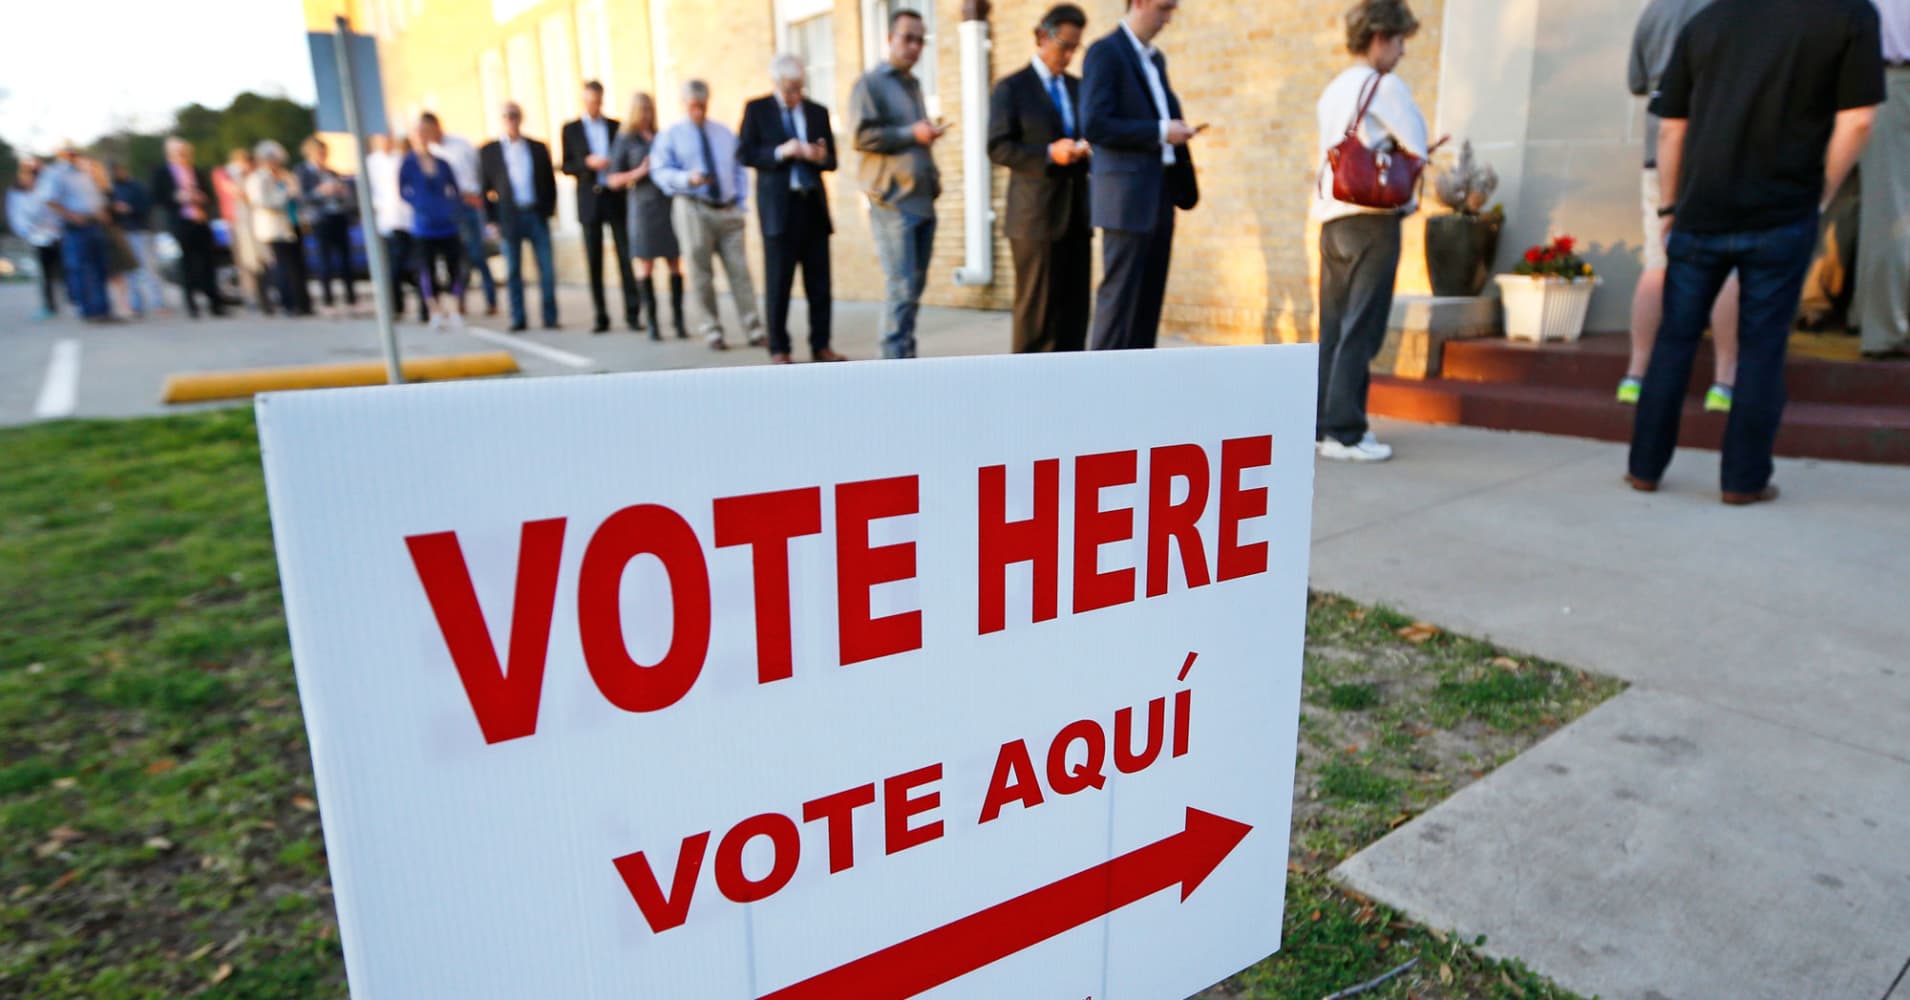 Here's what Goldman Sachs is telling investors to do going into midterm elections